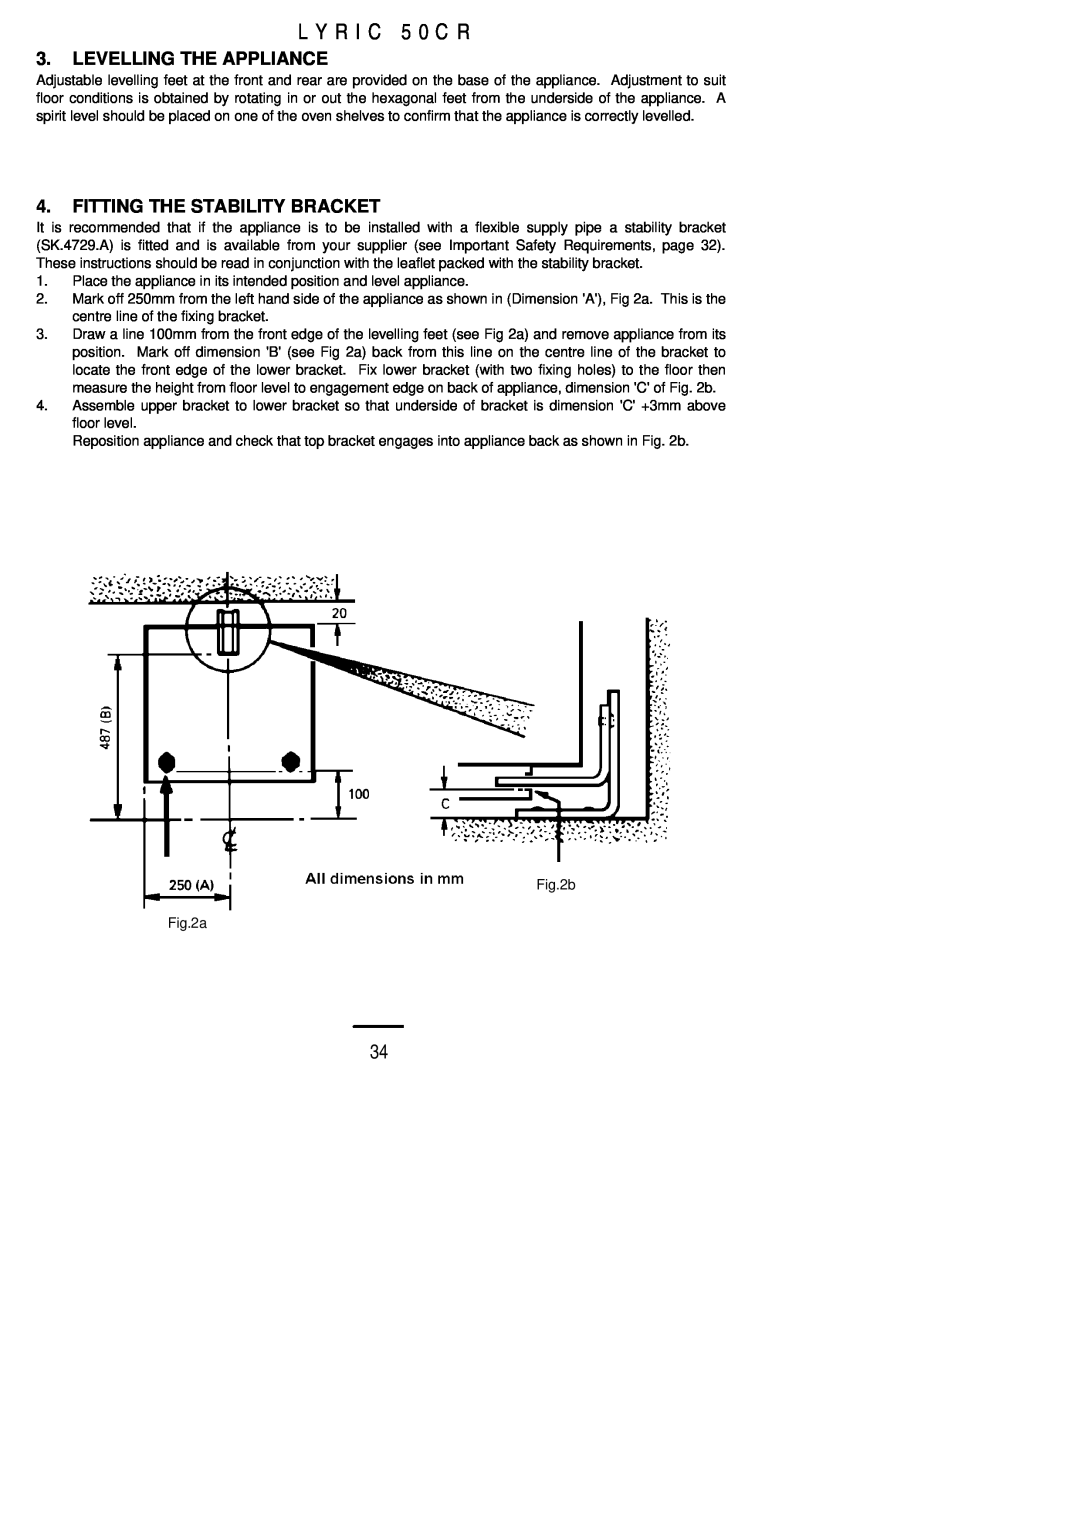 Electrolux 50 CR installation instructions L Y R I C 5 0 C R, Levelling The Appliance, Fitting The Stability Bracket 